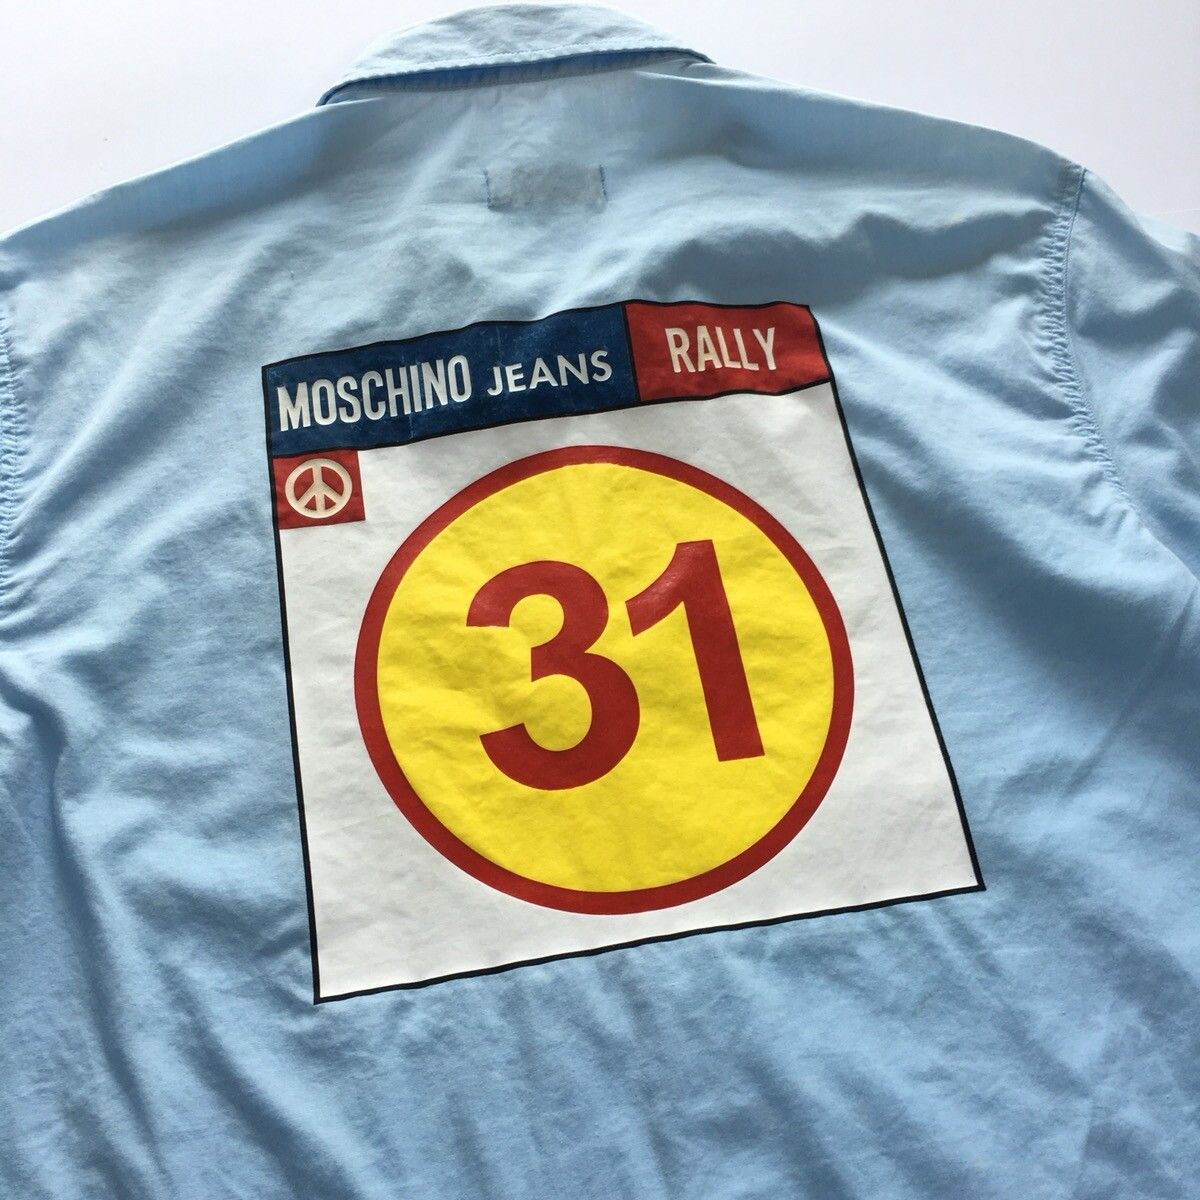 Moschino Jeans Rally 31 Button Shirt - 6